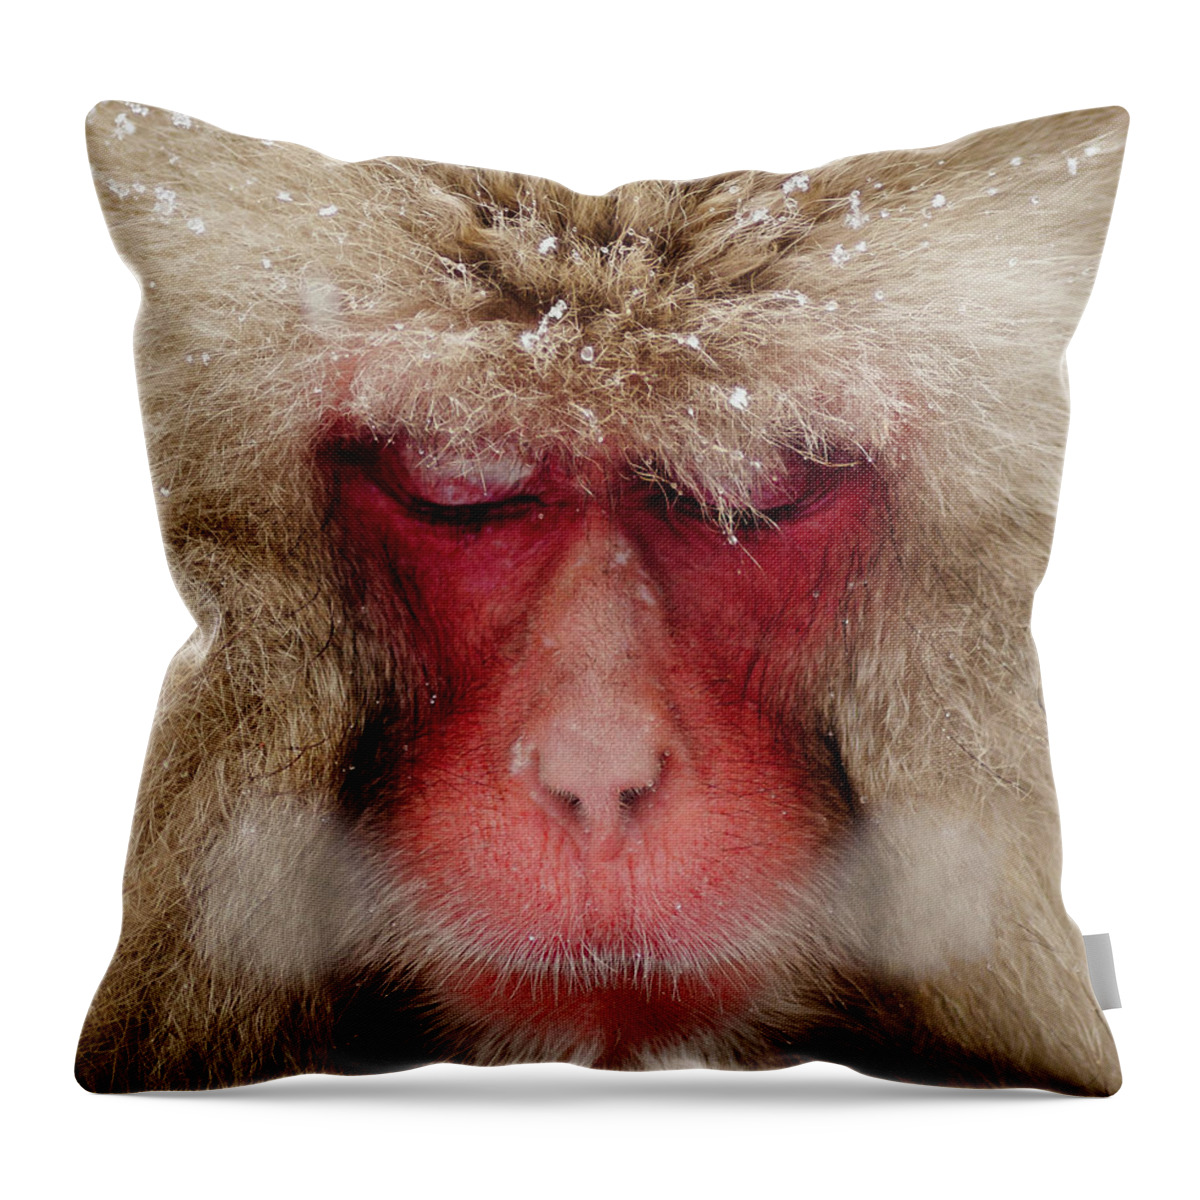 Snow Throw Pillow featuring the photograph Japanese Snow Monkey Breathing In Cold by Photography By Martin Irwin